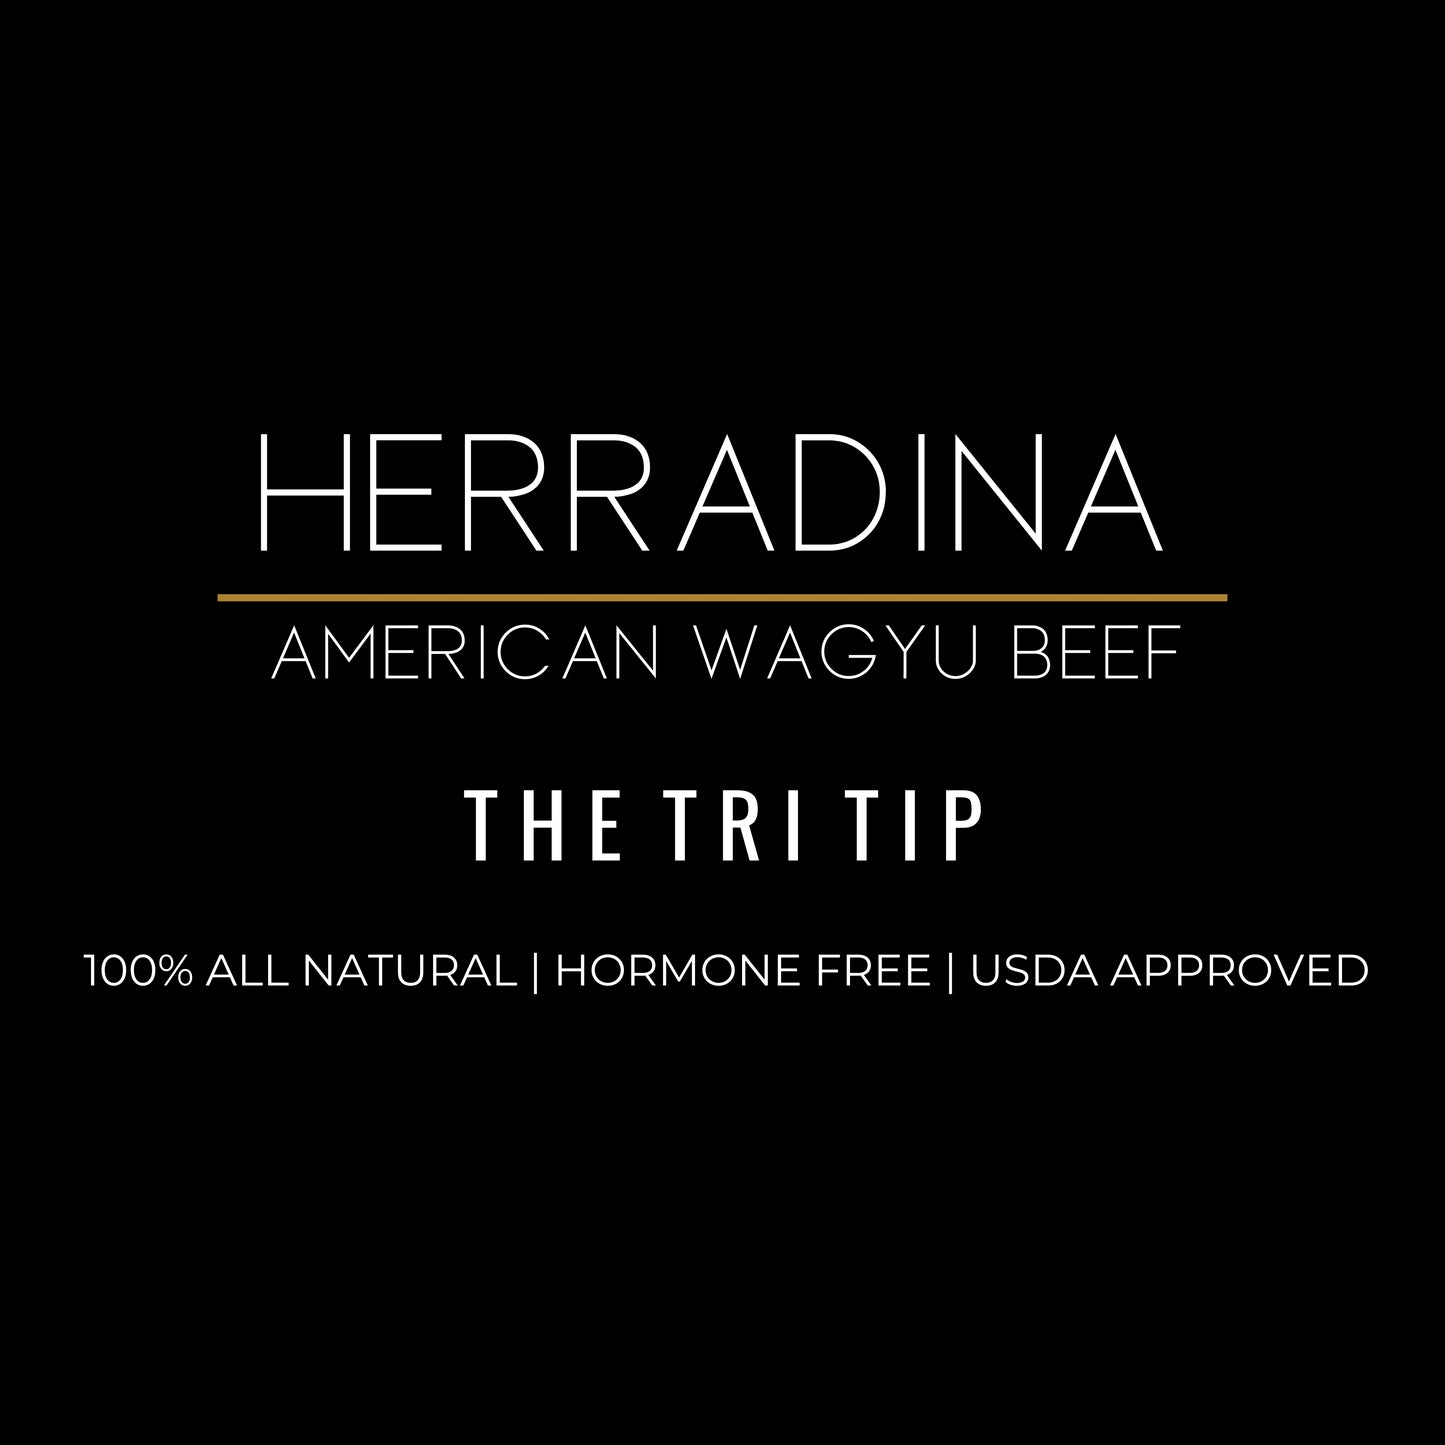 AMERICAN WAGYU BEEF - THE TRI TIP